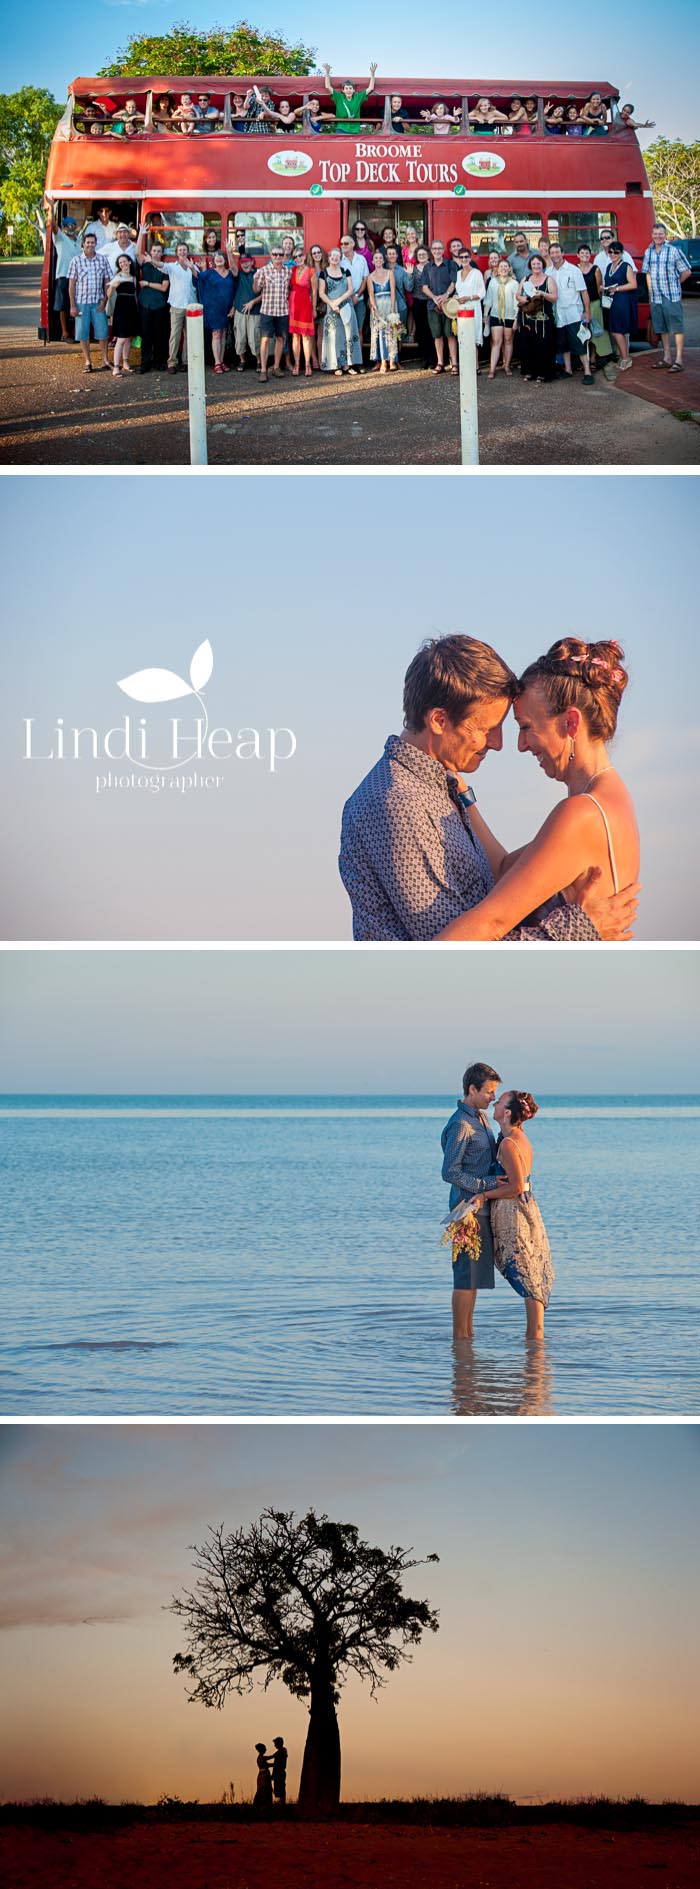 Wedding in Broome, Photography by Lindi Heap